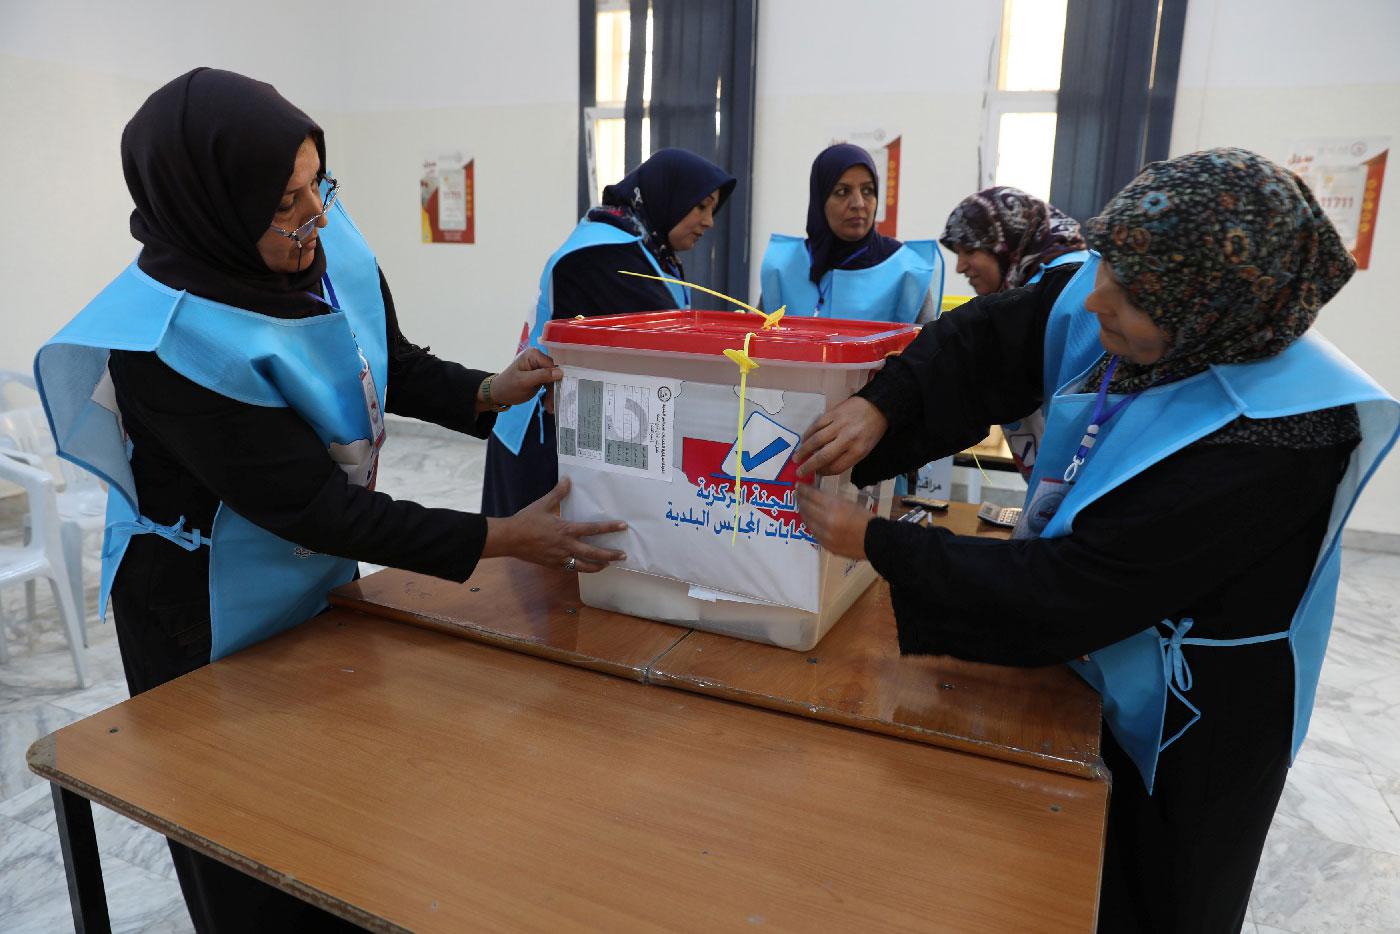 A group of members of the Central Committee for Municipal Elections are seen during an election simulation in local school, Tripoli, Libya February 3, 2019.